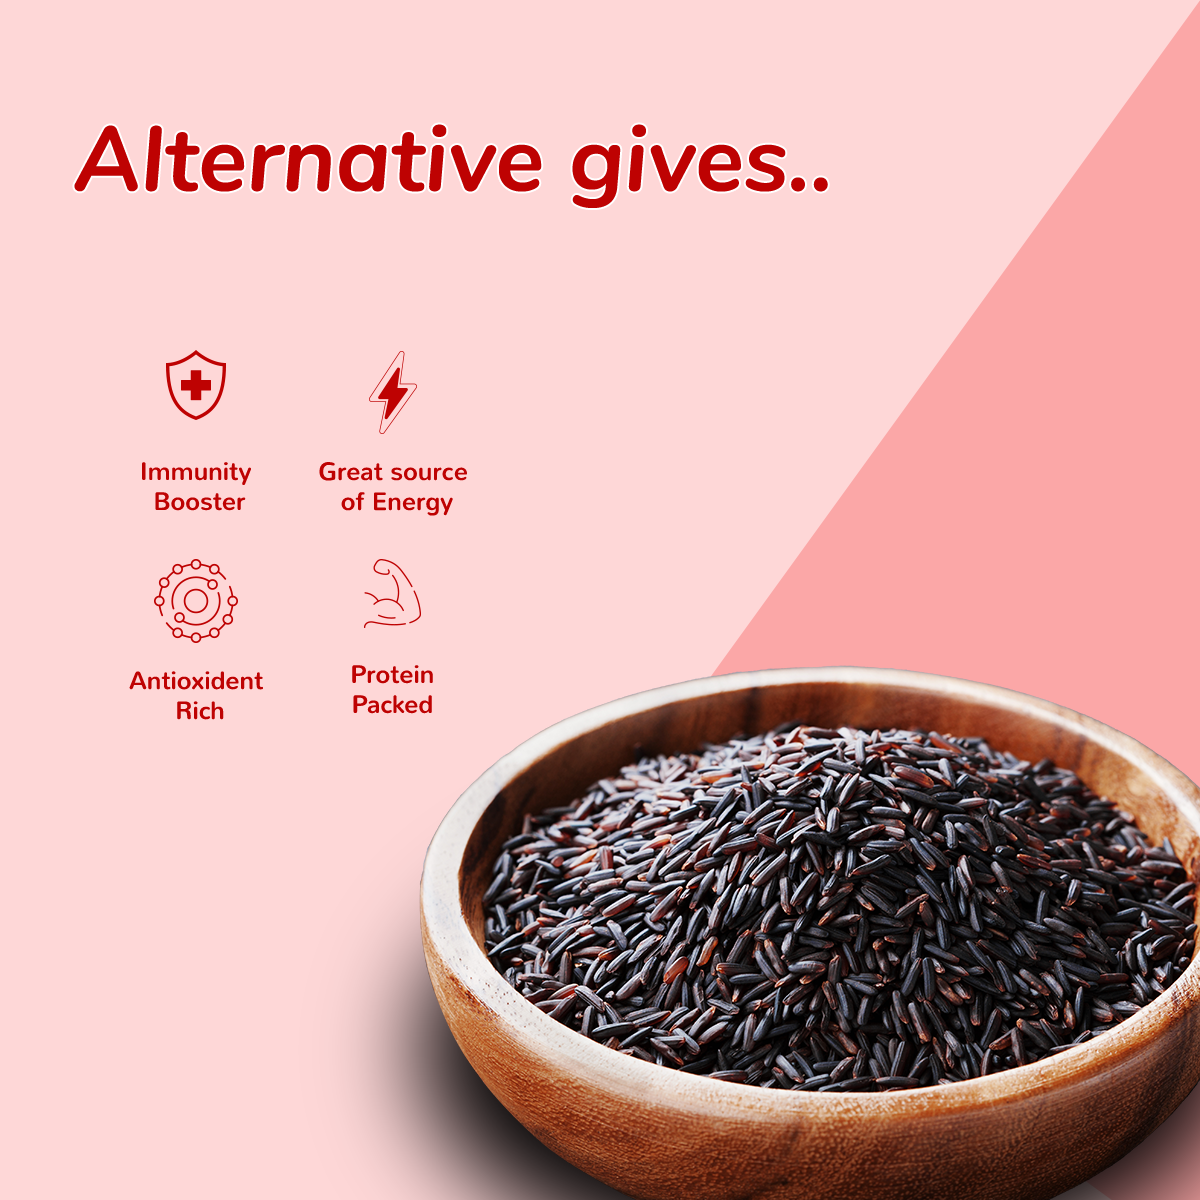 Native Unpolished Black Rice (Pack of 3) with free Gulkand  made of Natural Damask Rose and Pure Honey (100gms)